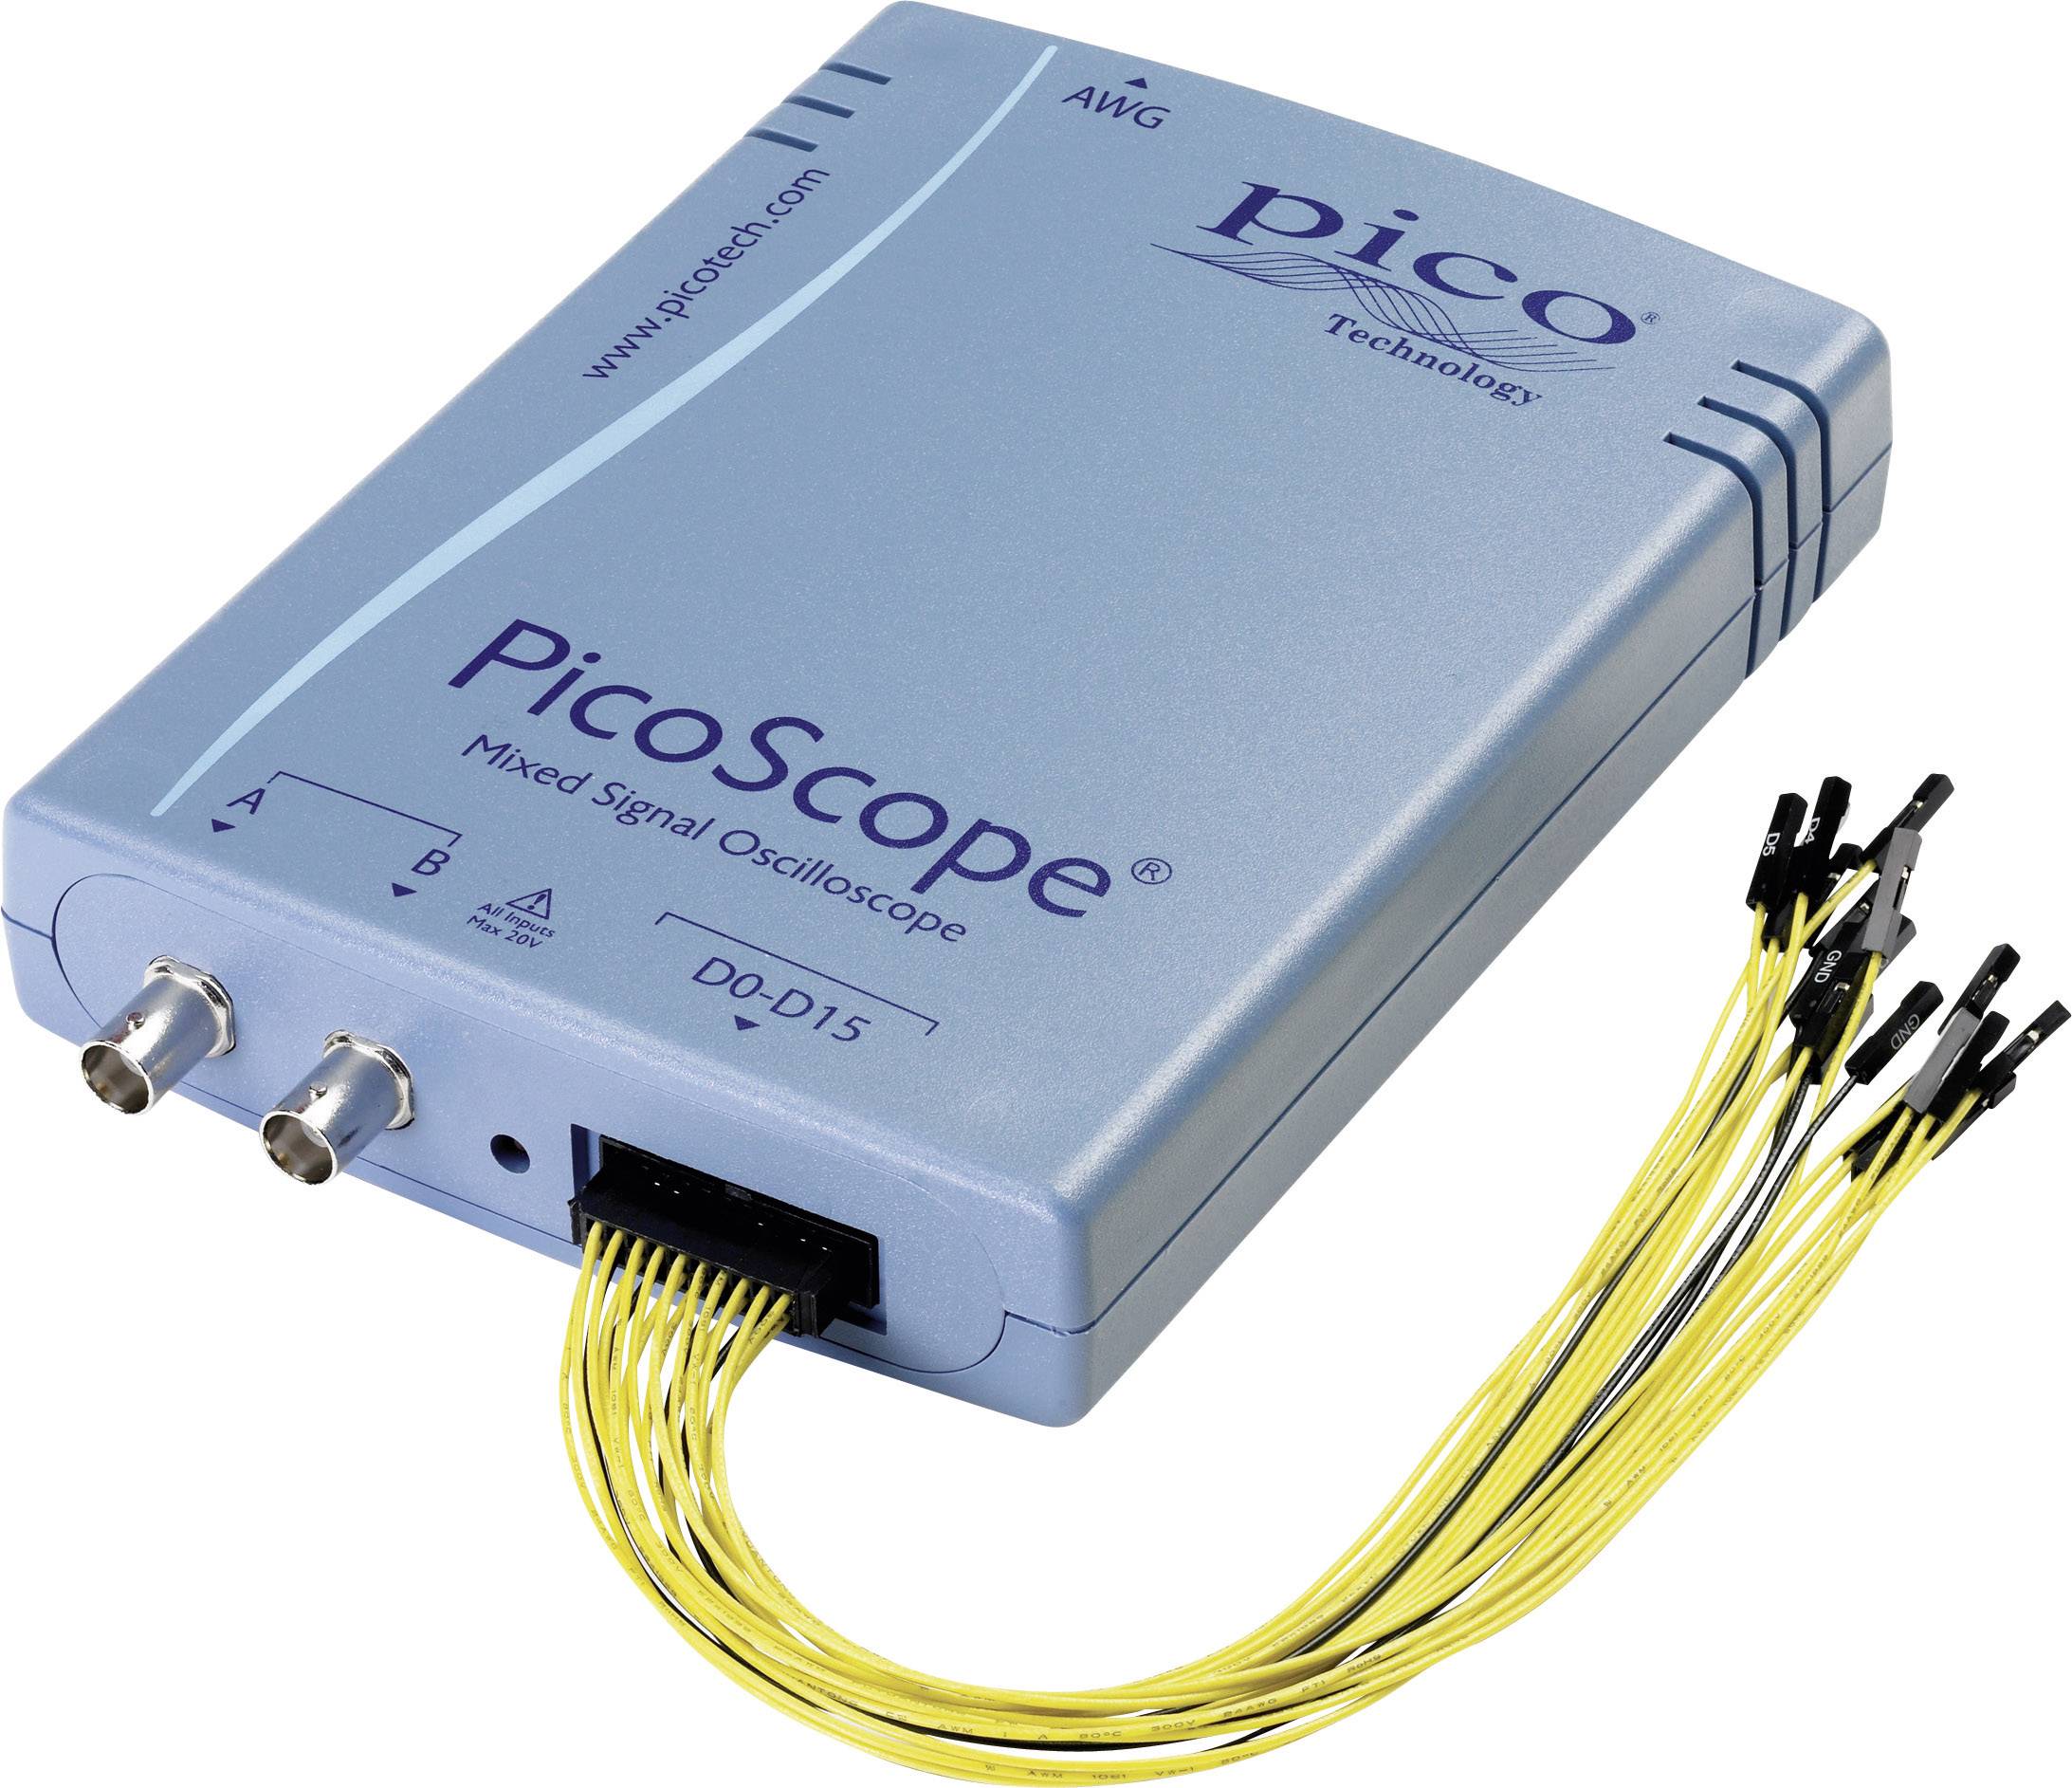 Pico 2205A BASIC PicoScope 2205A 2 channel AWG 25MHz w//OUT Probes